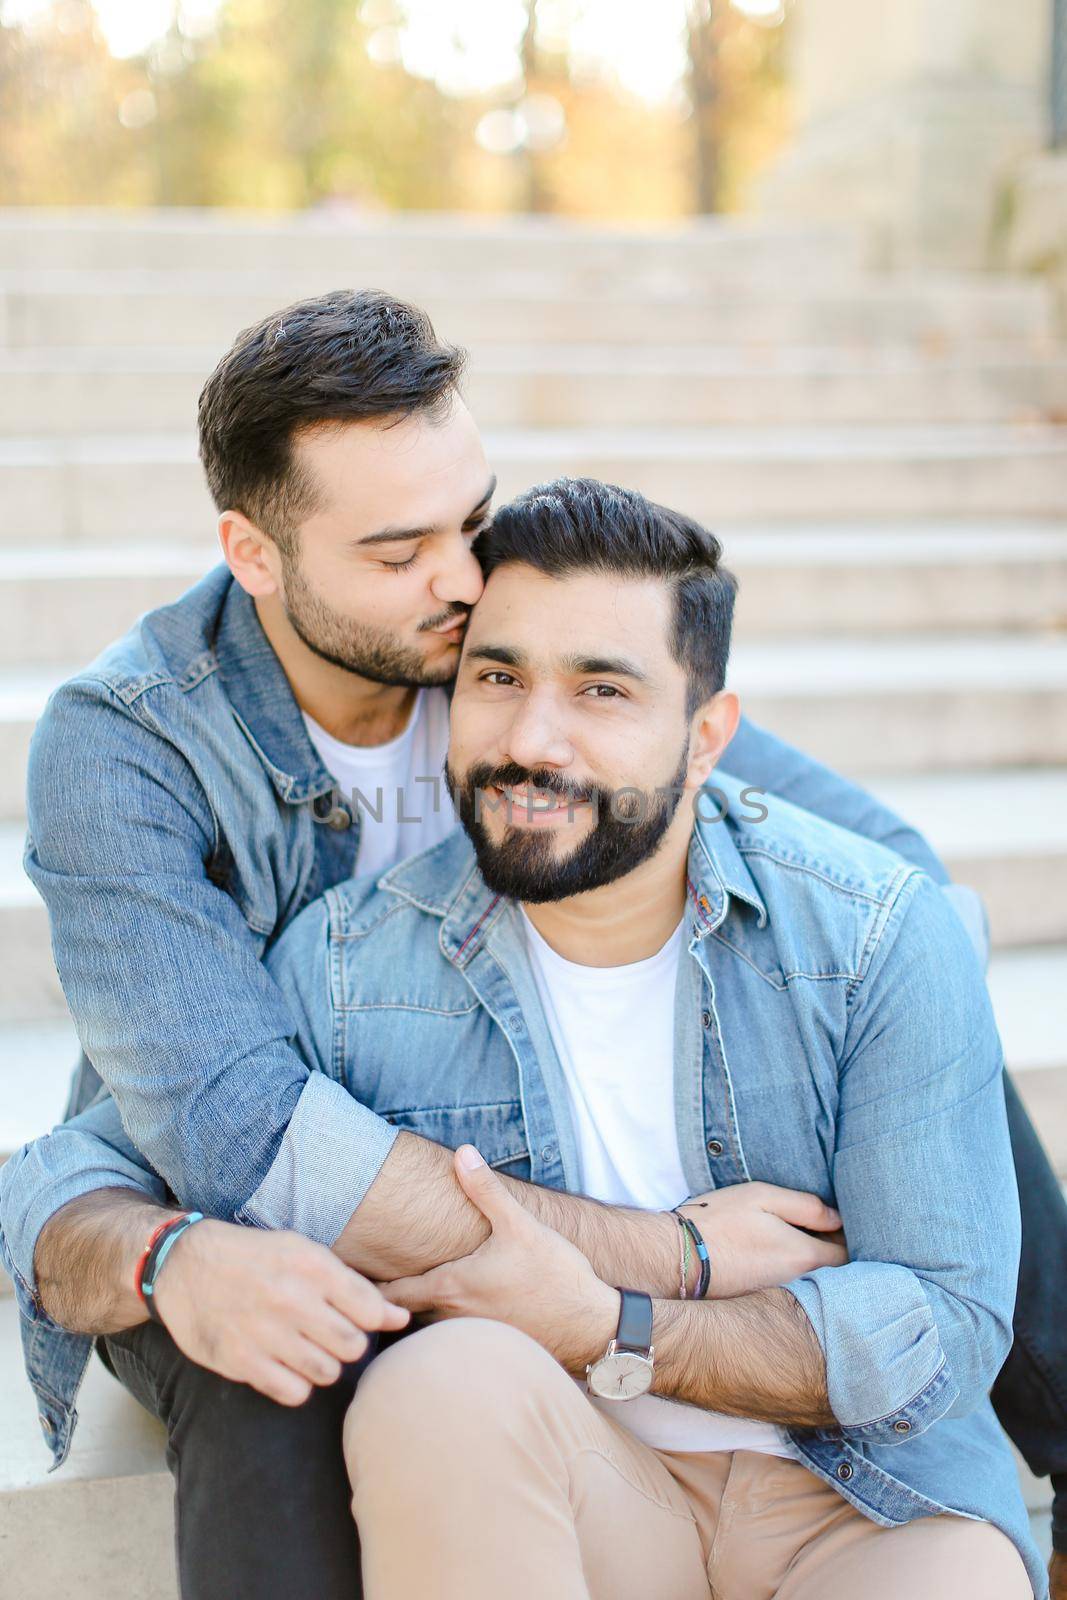 Caucasian young gays sitting on concrete stairs and kissing, wearing jeans shirts. Concept of same sex couple and lgbt.